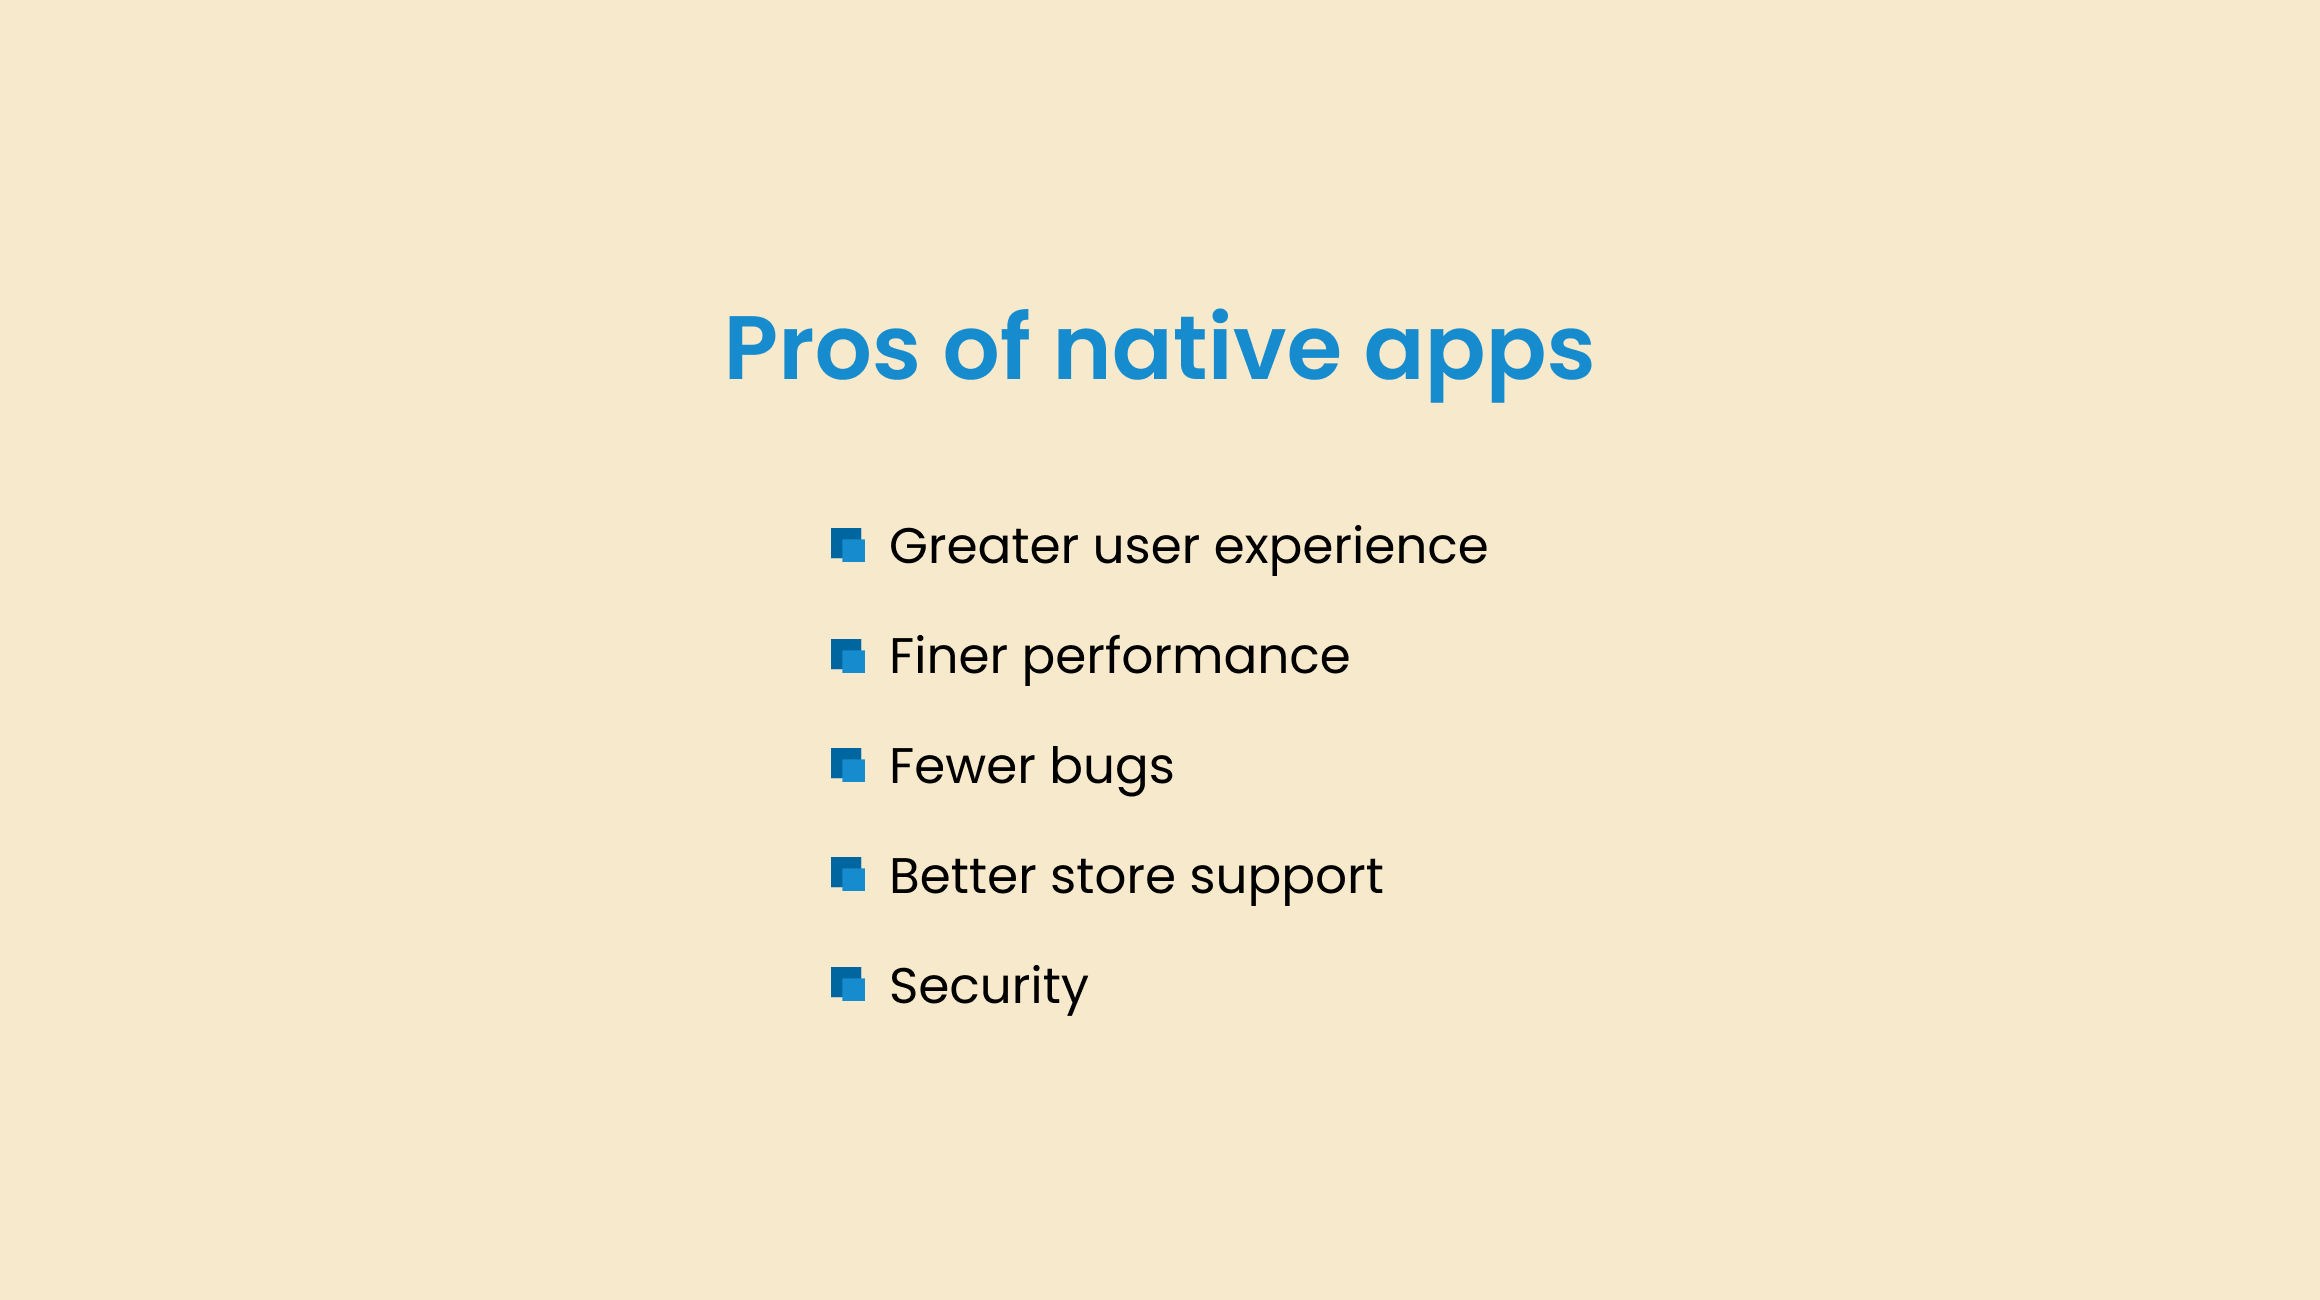 Pros of native apps